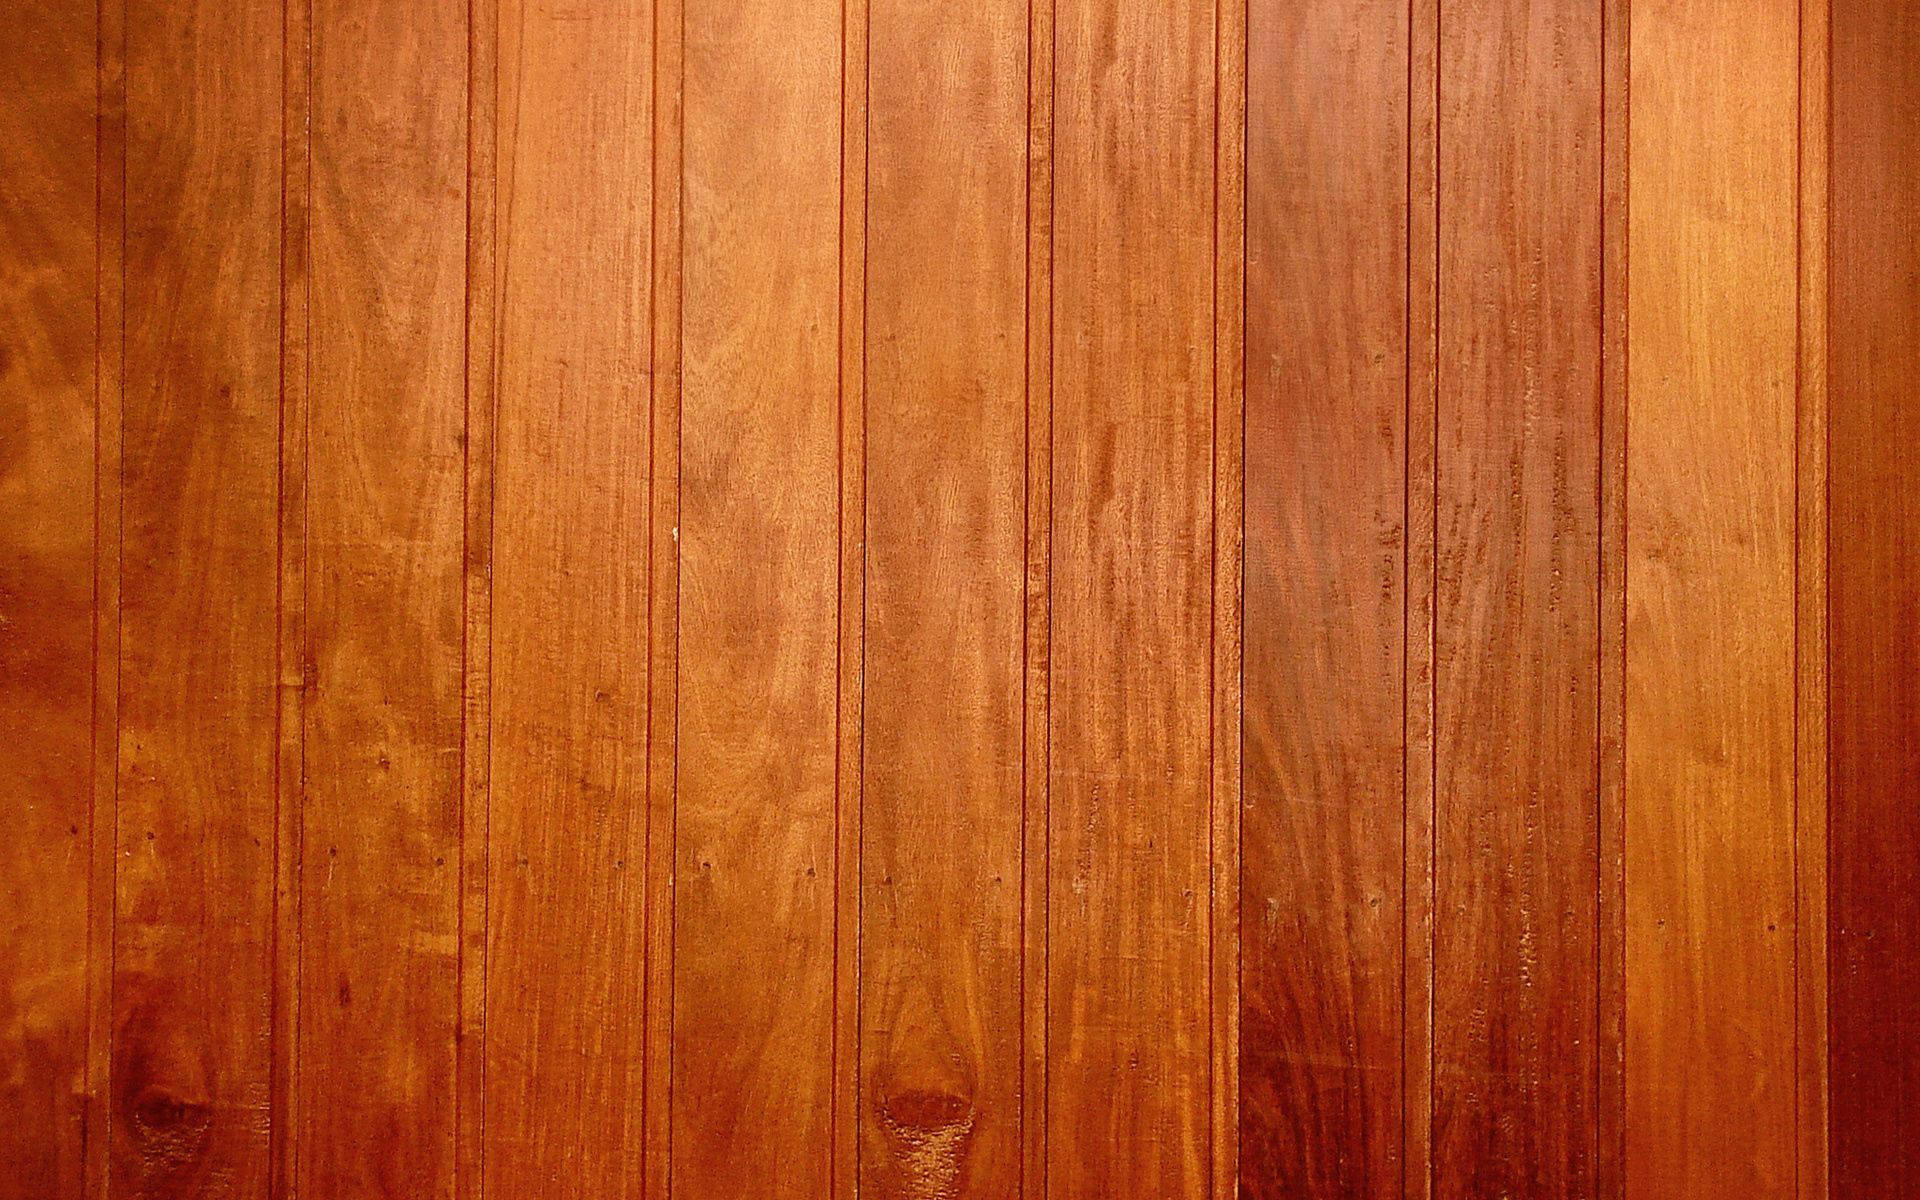 background, wooden, wood, texture, textures, planks, board